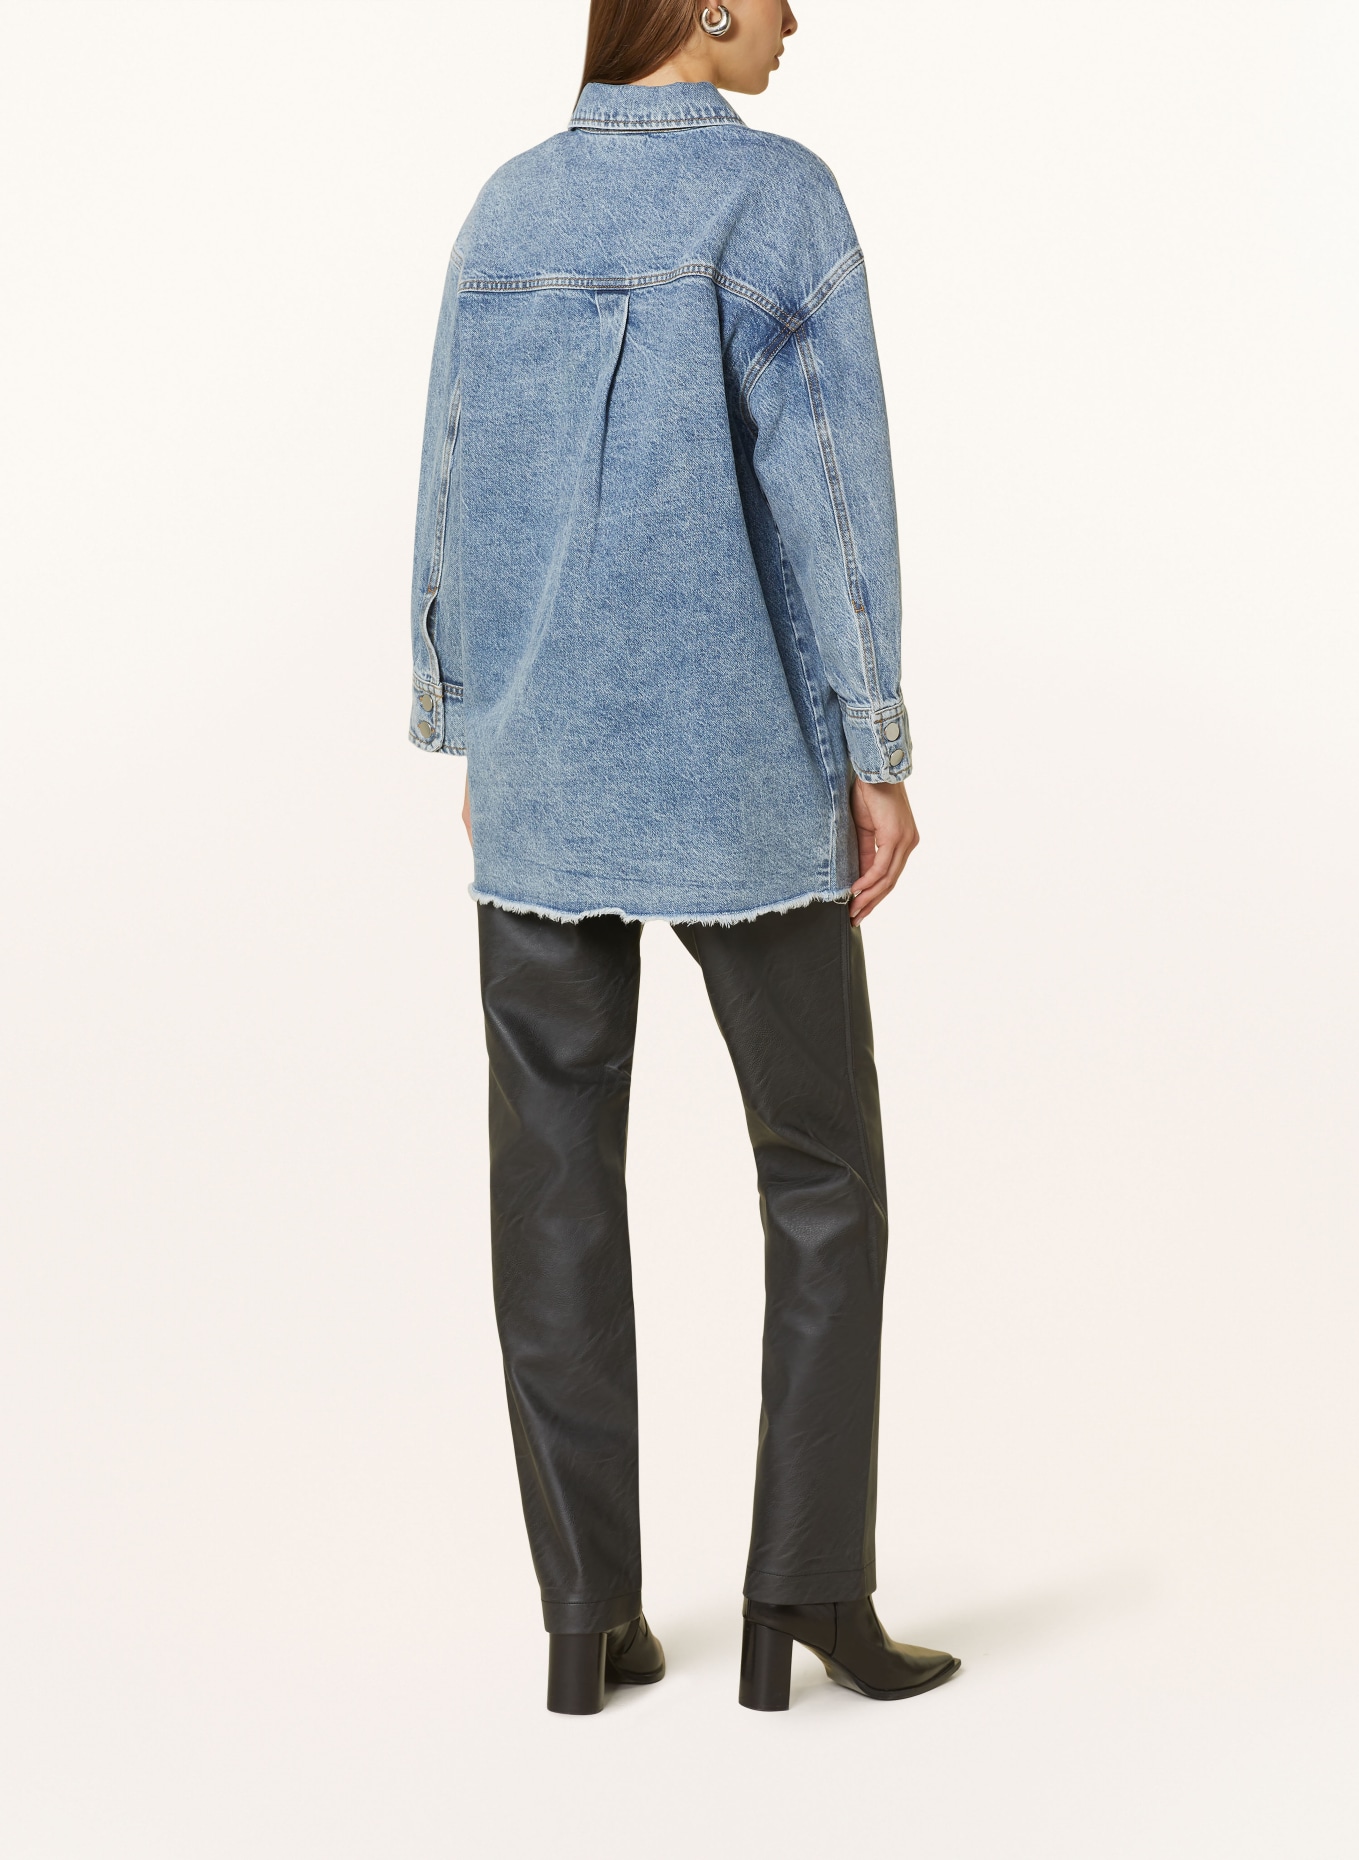 Y.A.S. Denim overshirt with 3/4 sleeves and decorative gems, Color: BLUE (Image 3)